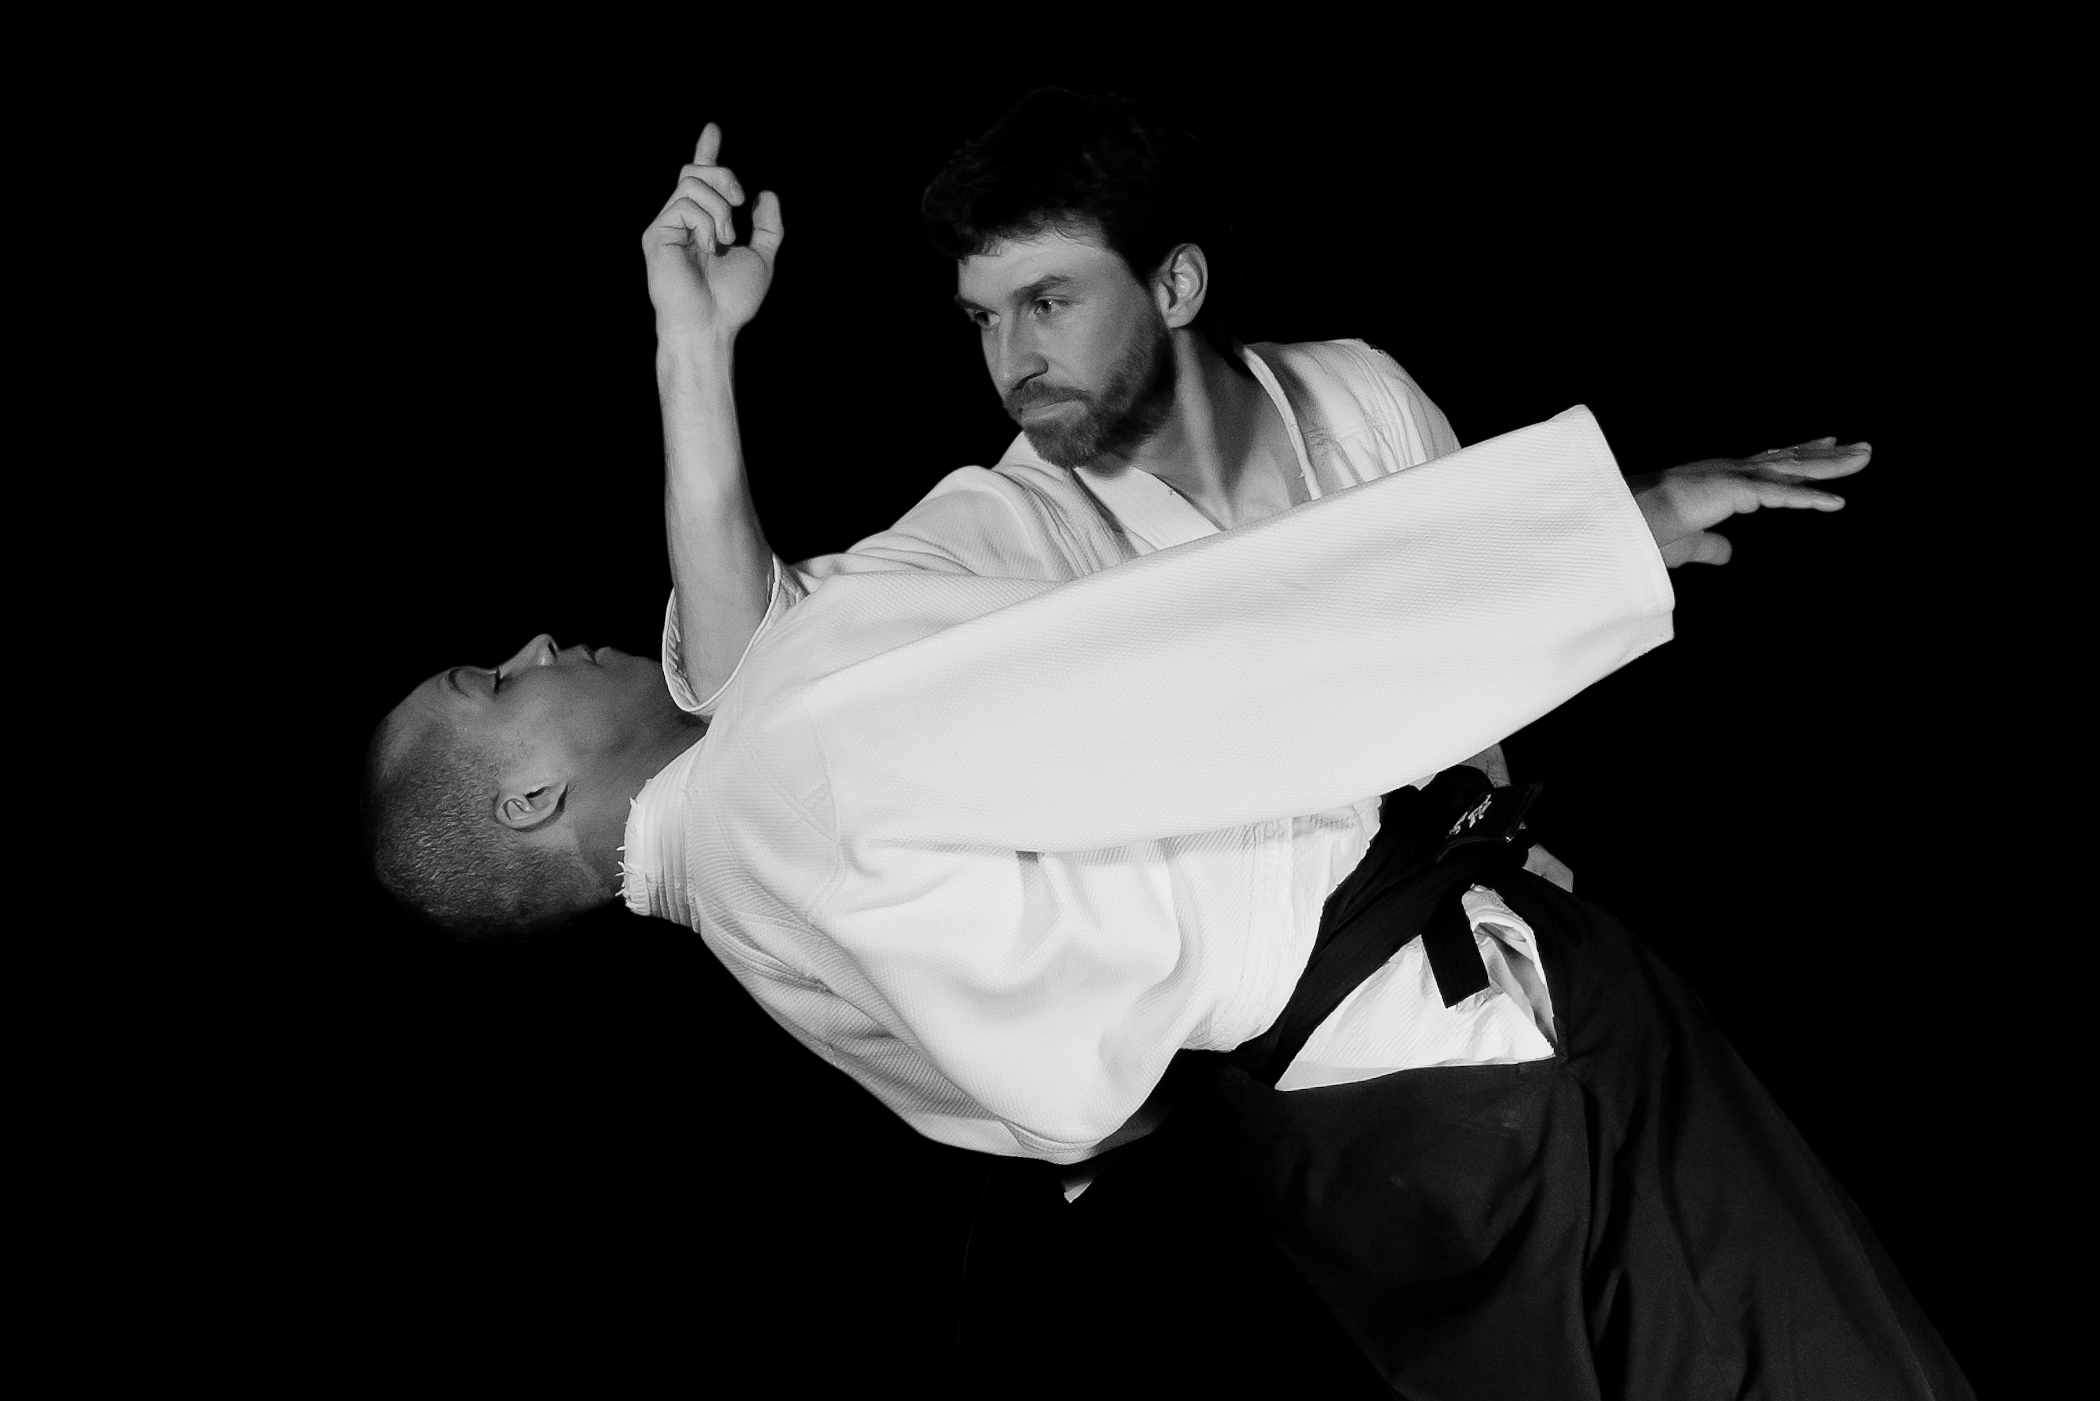 TOULOUSE AIKIDO CLUB